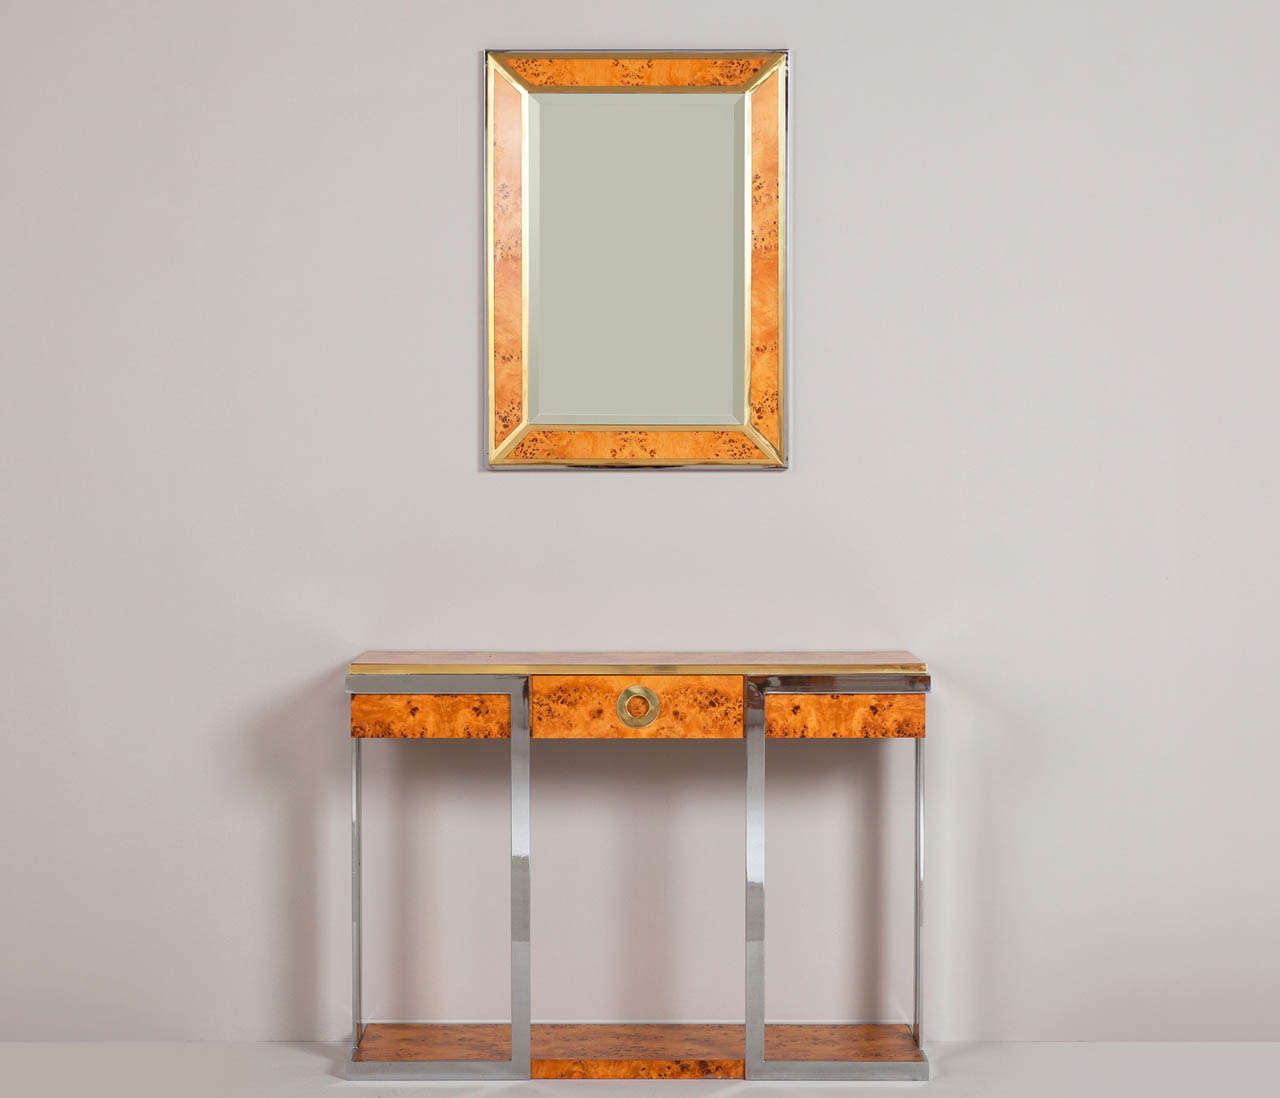 equipped with one drawer, and mirror with faceted edge